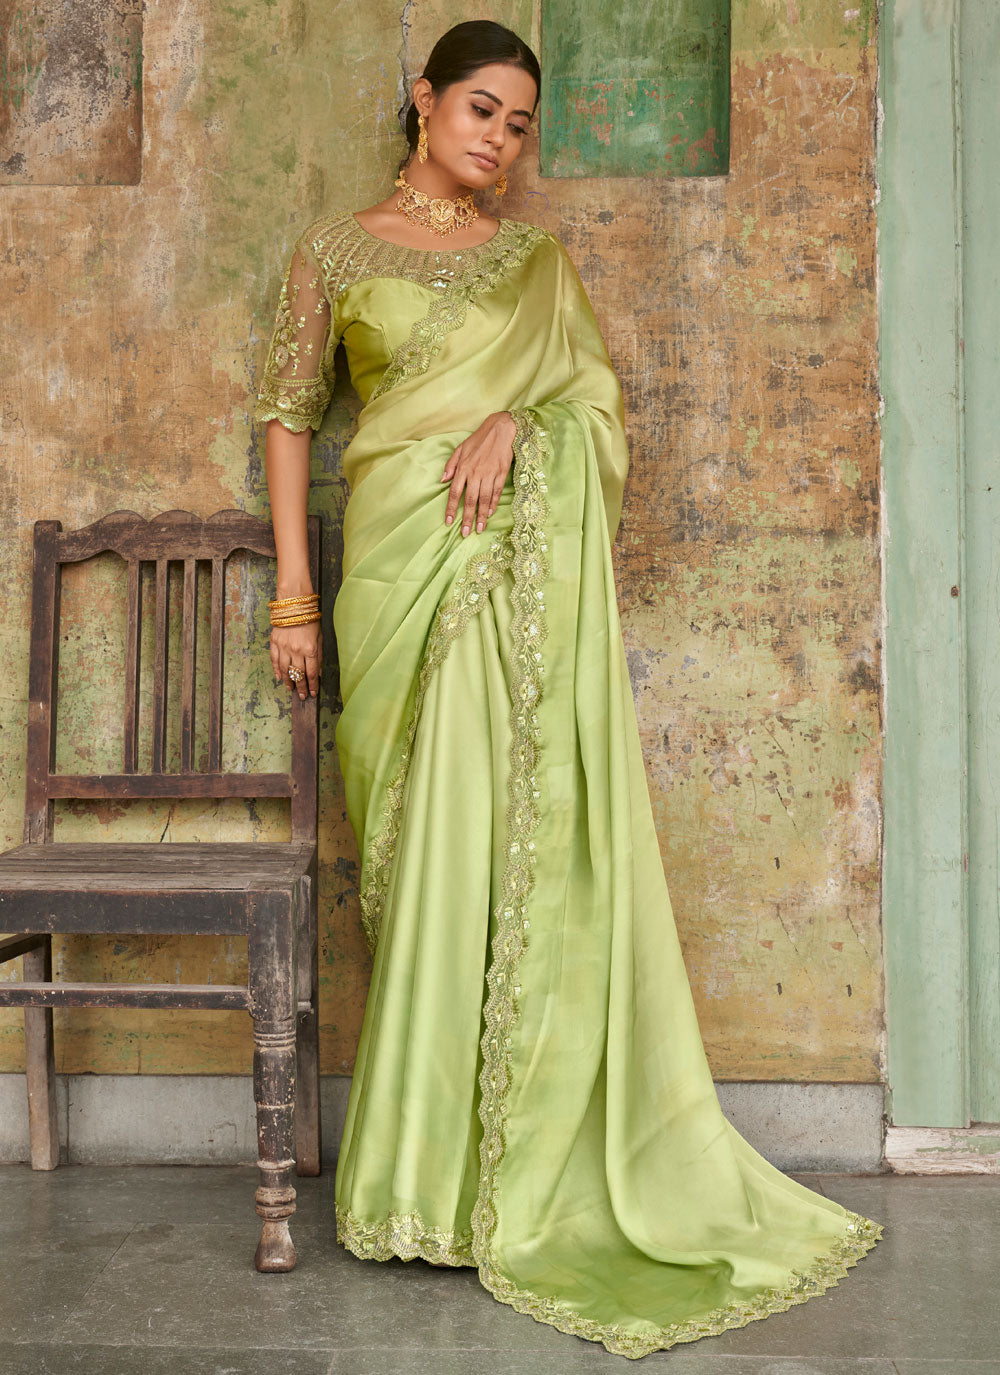 Embroidered Lace Satin Saree In Green Color